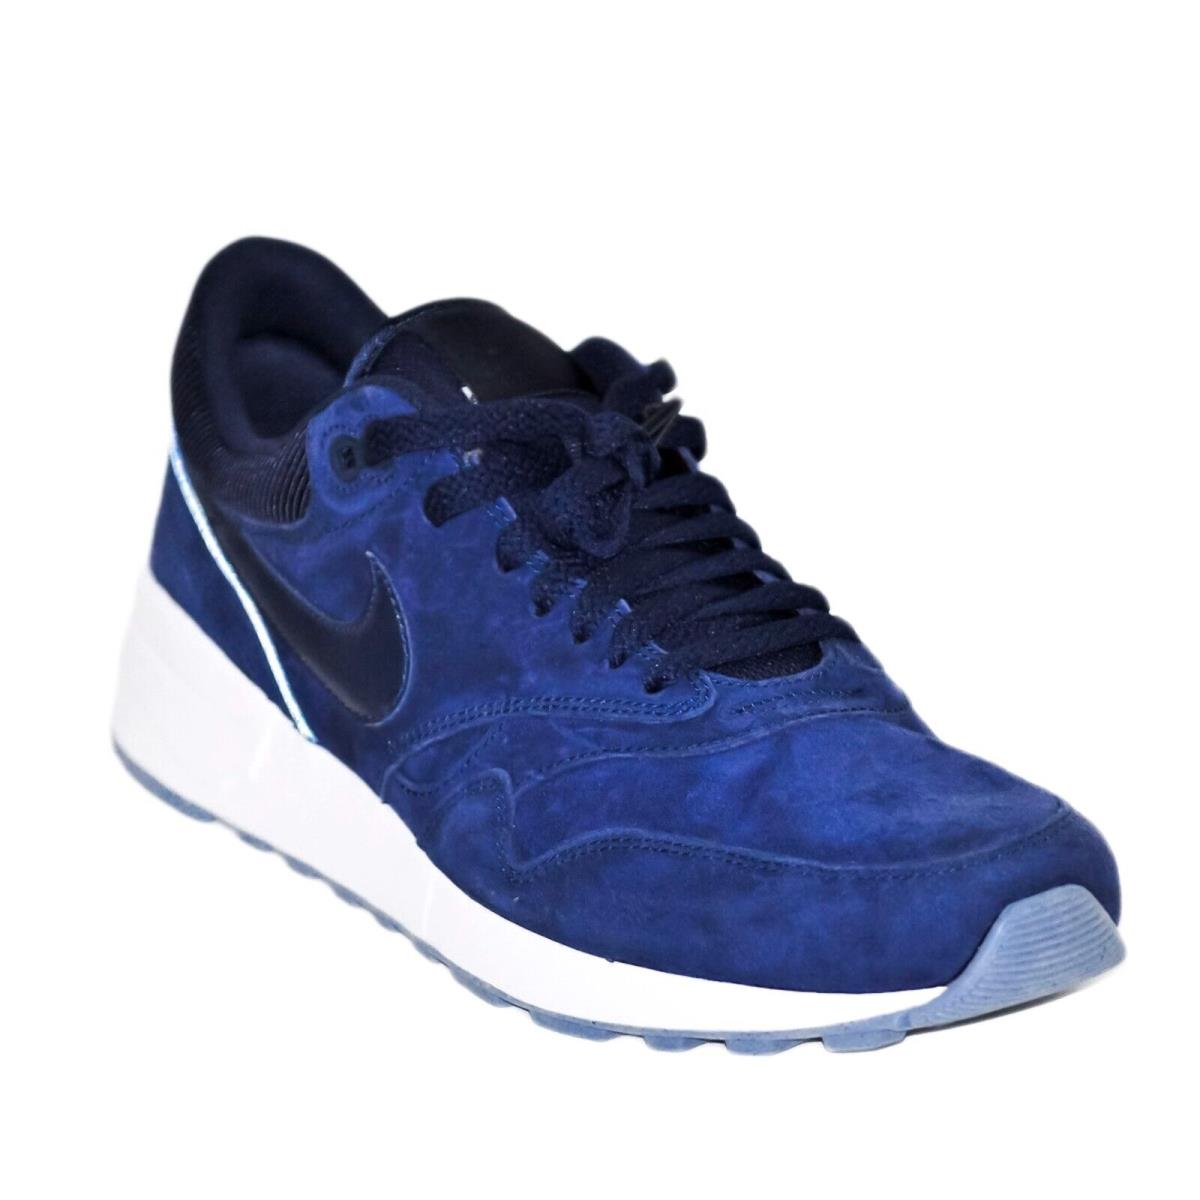 Nike Air Odyssey Leather Obsidian Men`s Shoes Size 9